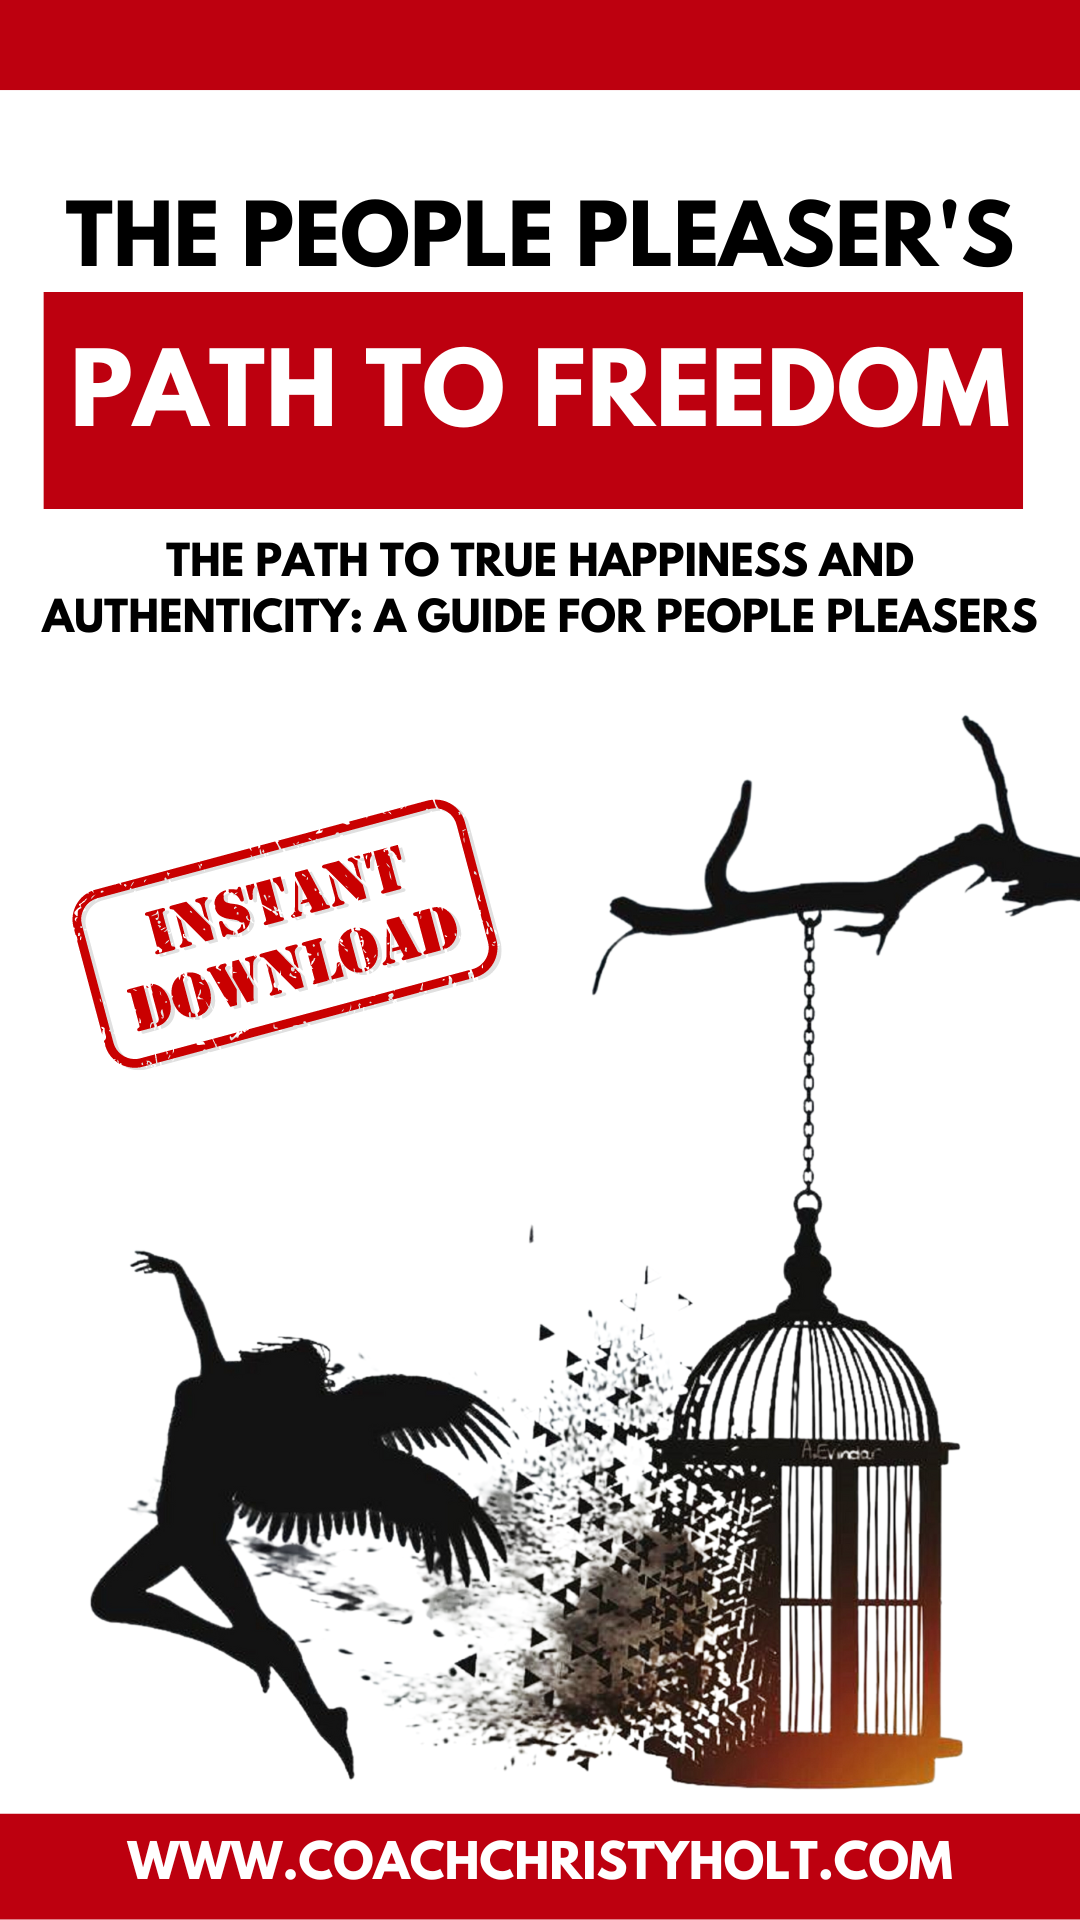 Discover Authenticity: Your Path to Freedom Begins Here